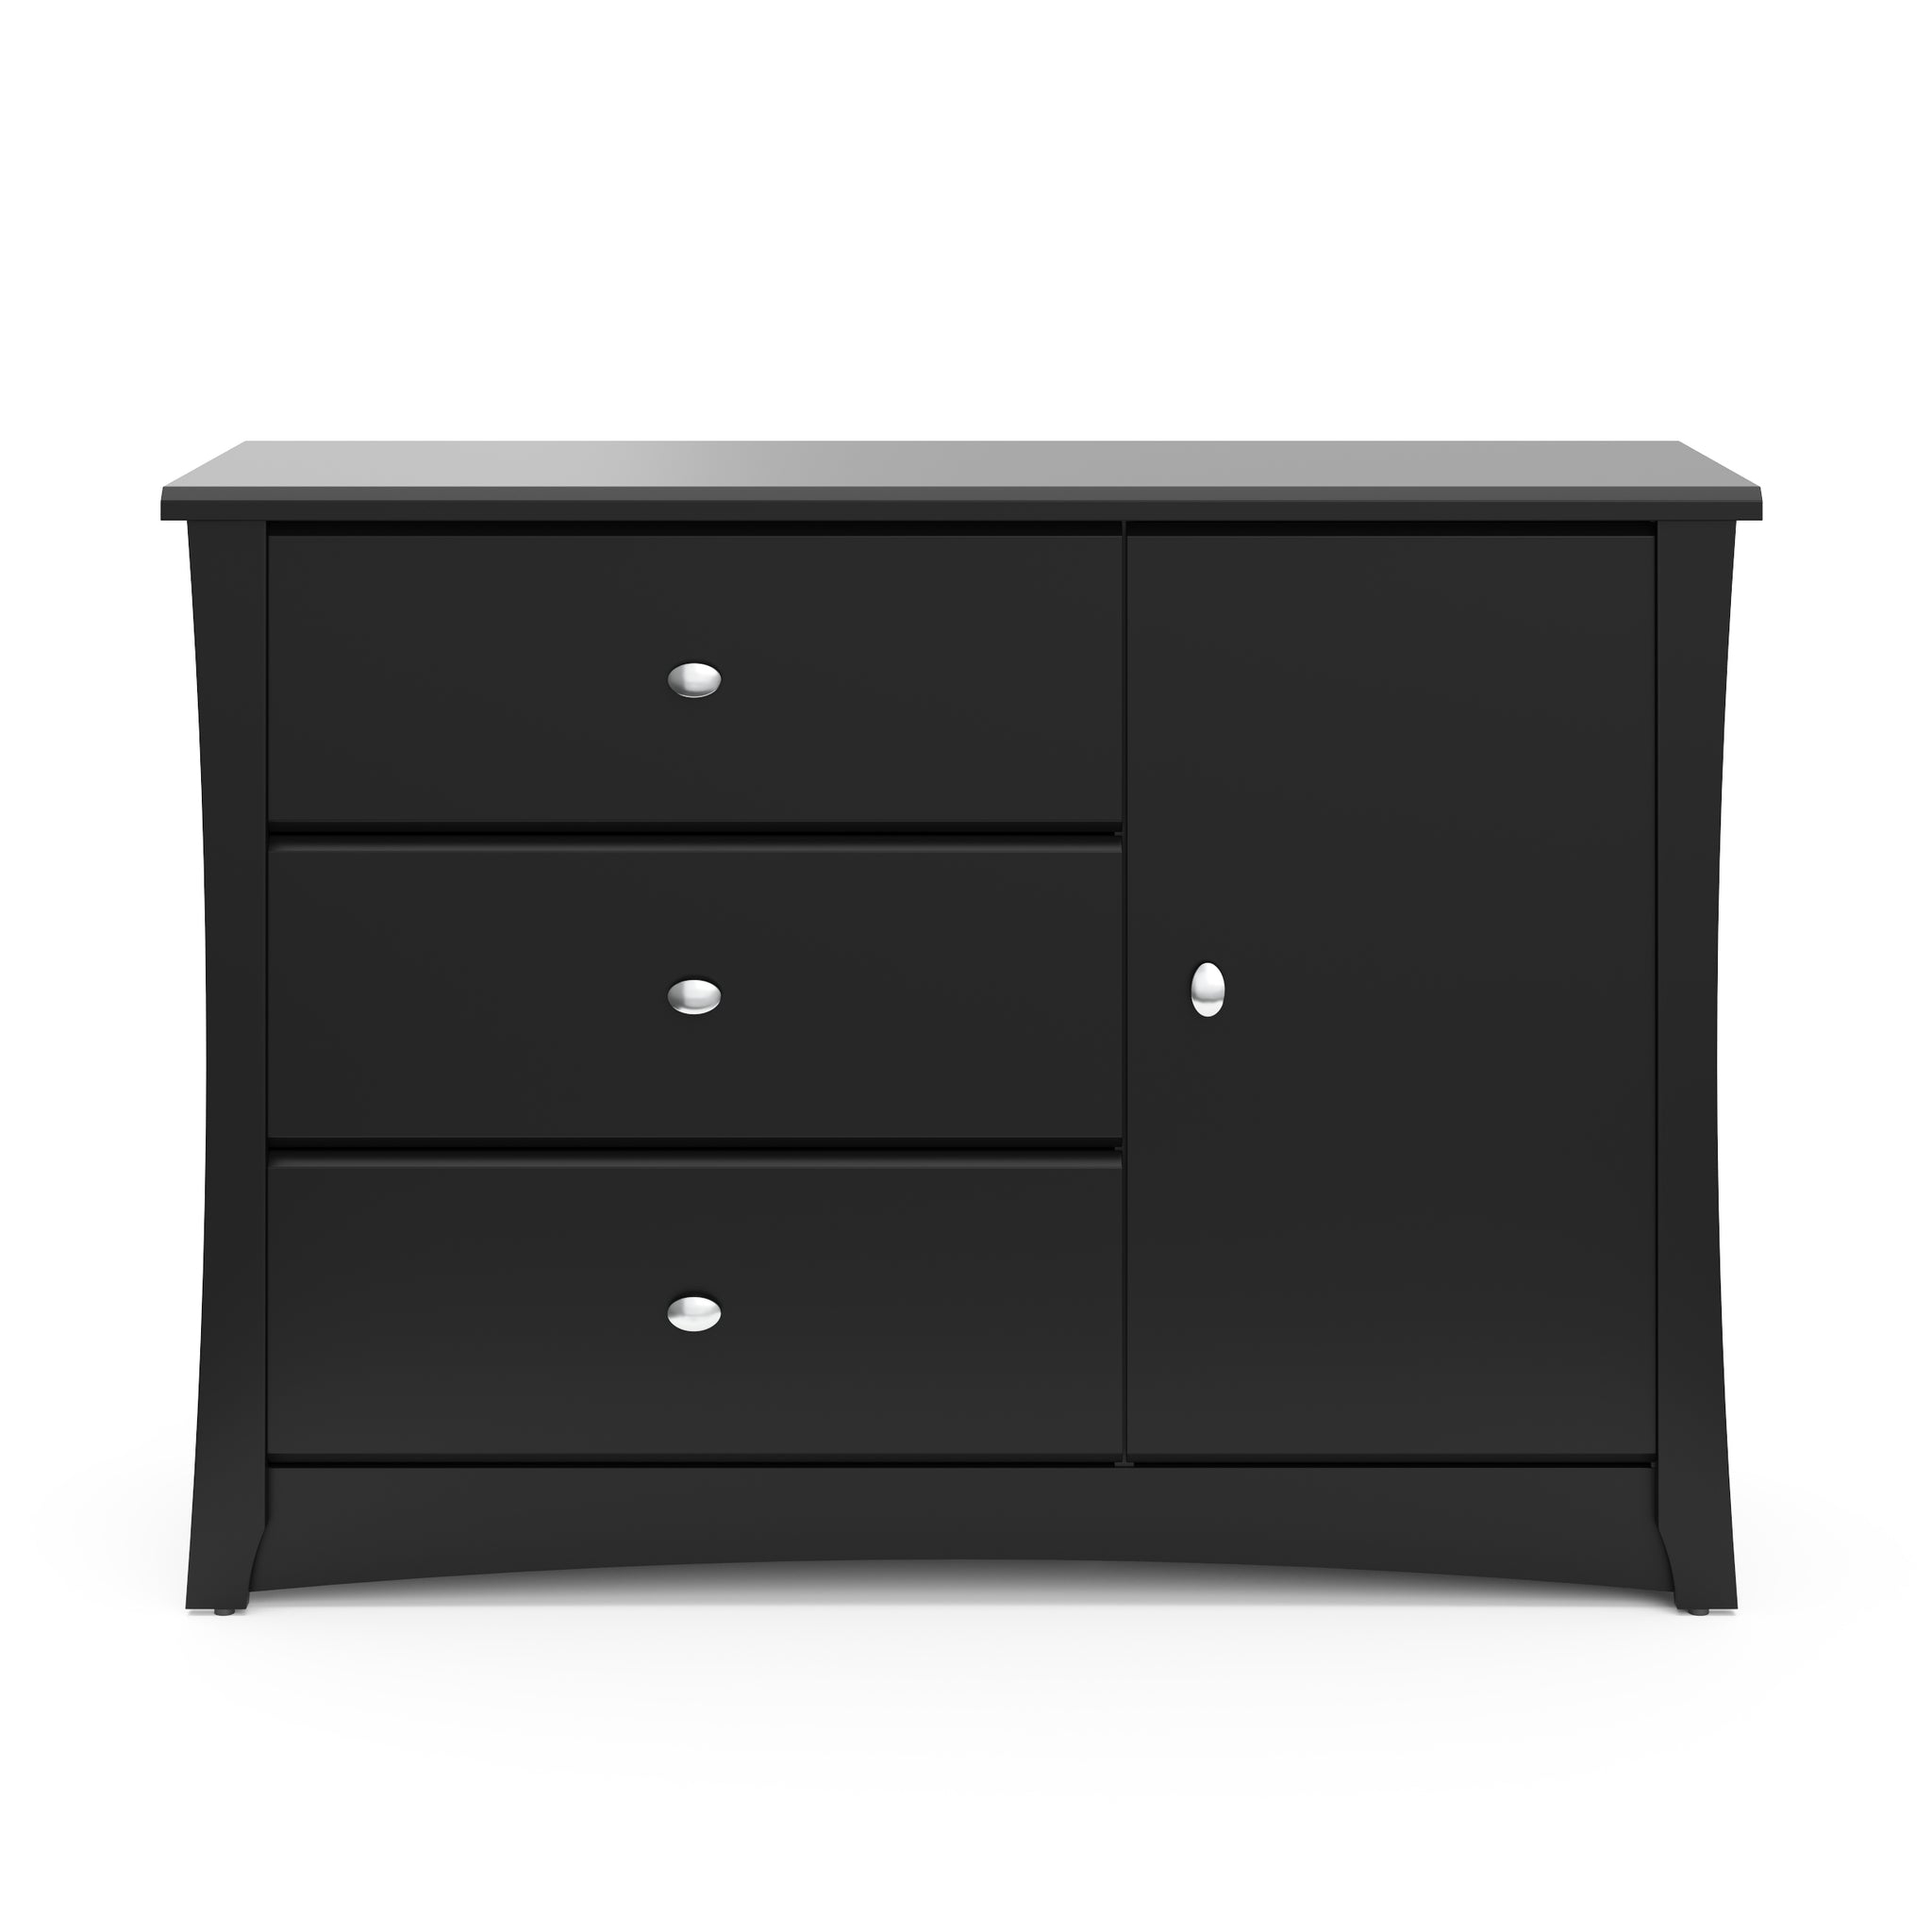 Front view of black 3 drawer chest